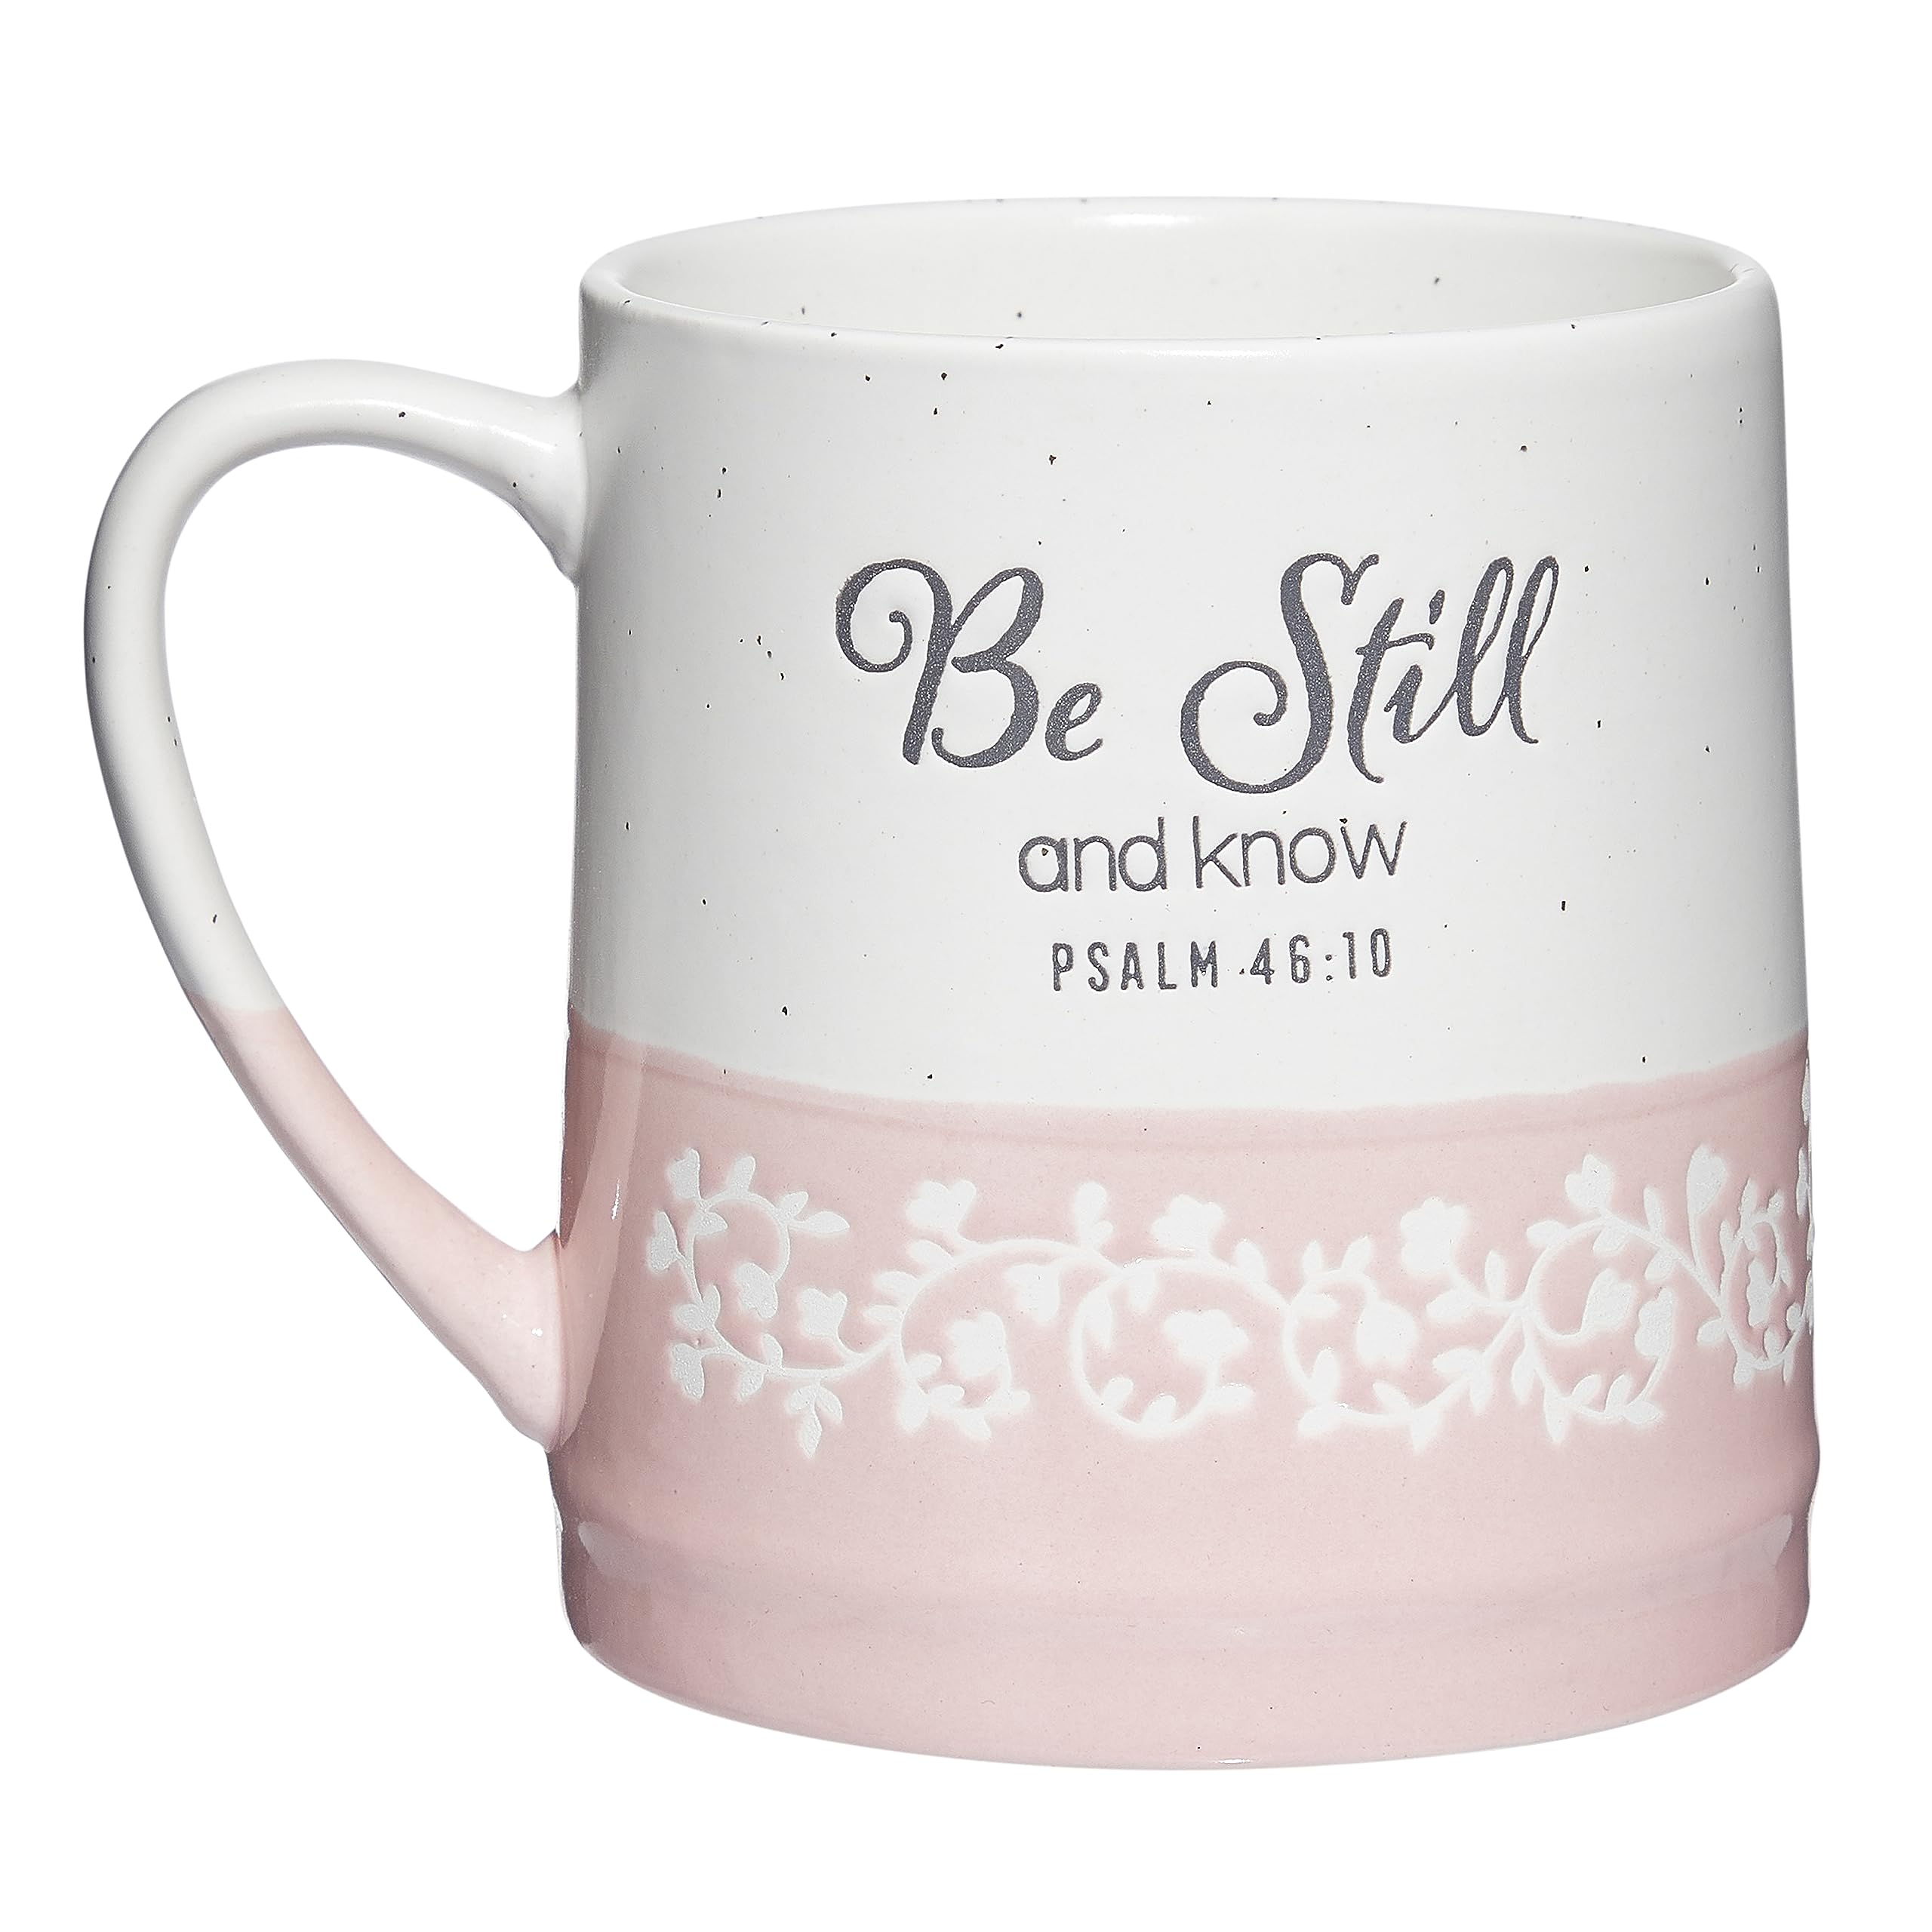 Sheffield Home Religious Coffee Mugs - Stoneware Motivational Bible Coffee Mugs For Women And Men - Inspirational Mugs And Cups, Mugs For Tea, Latte, And Hot Chocolate  - Like New